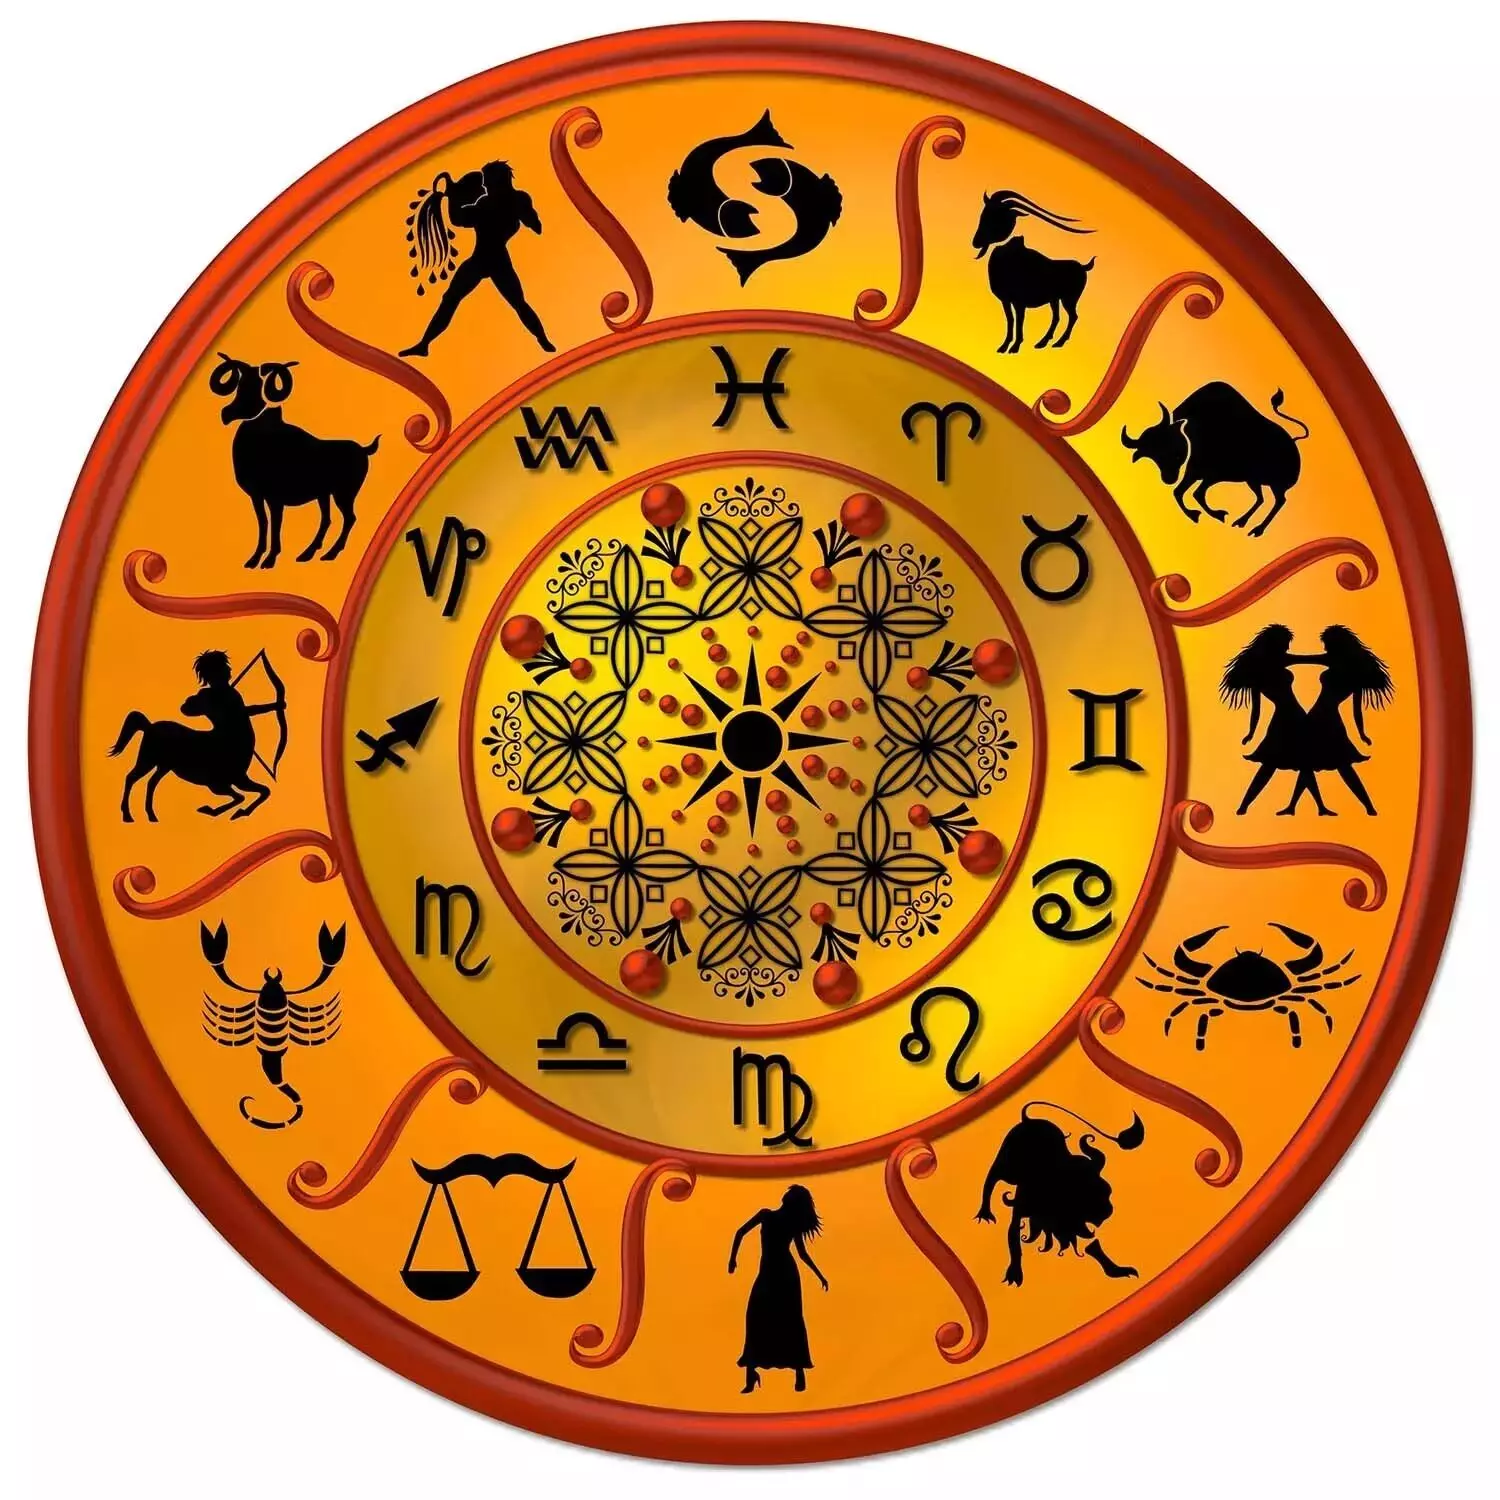 26 September  – Know your todays horoscope